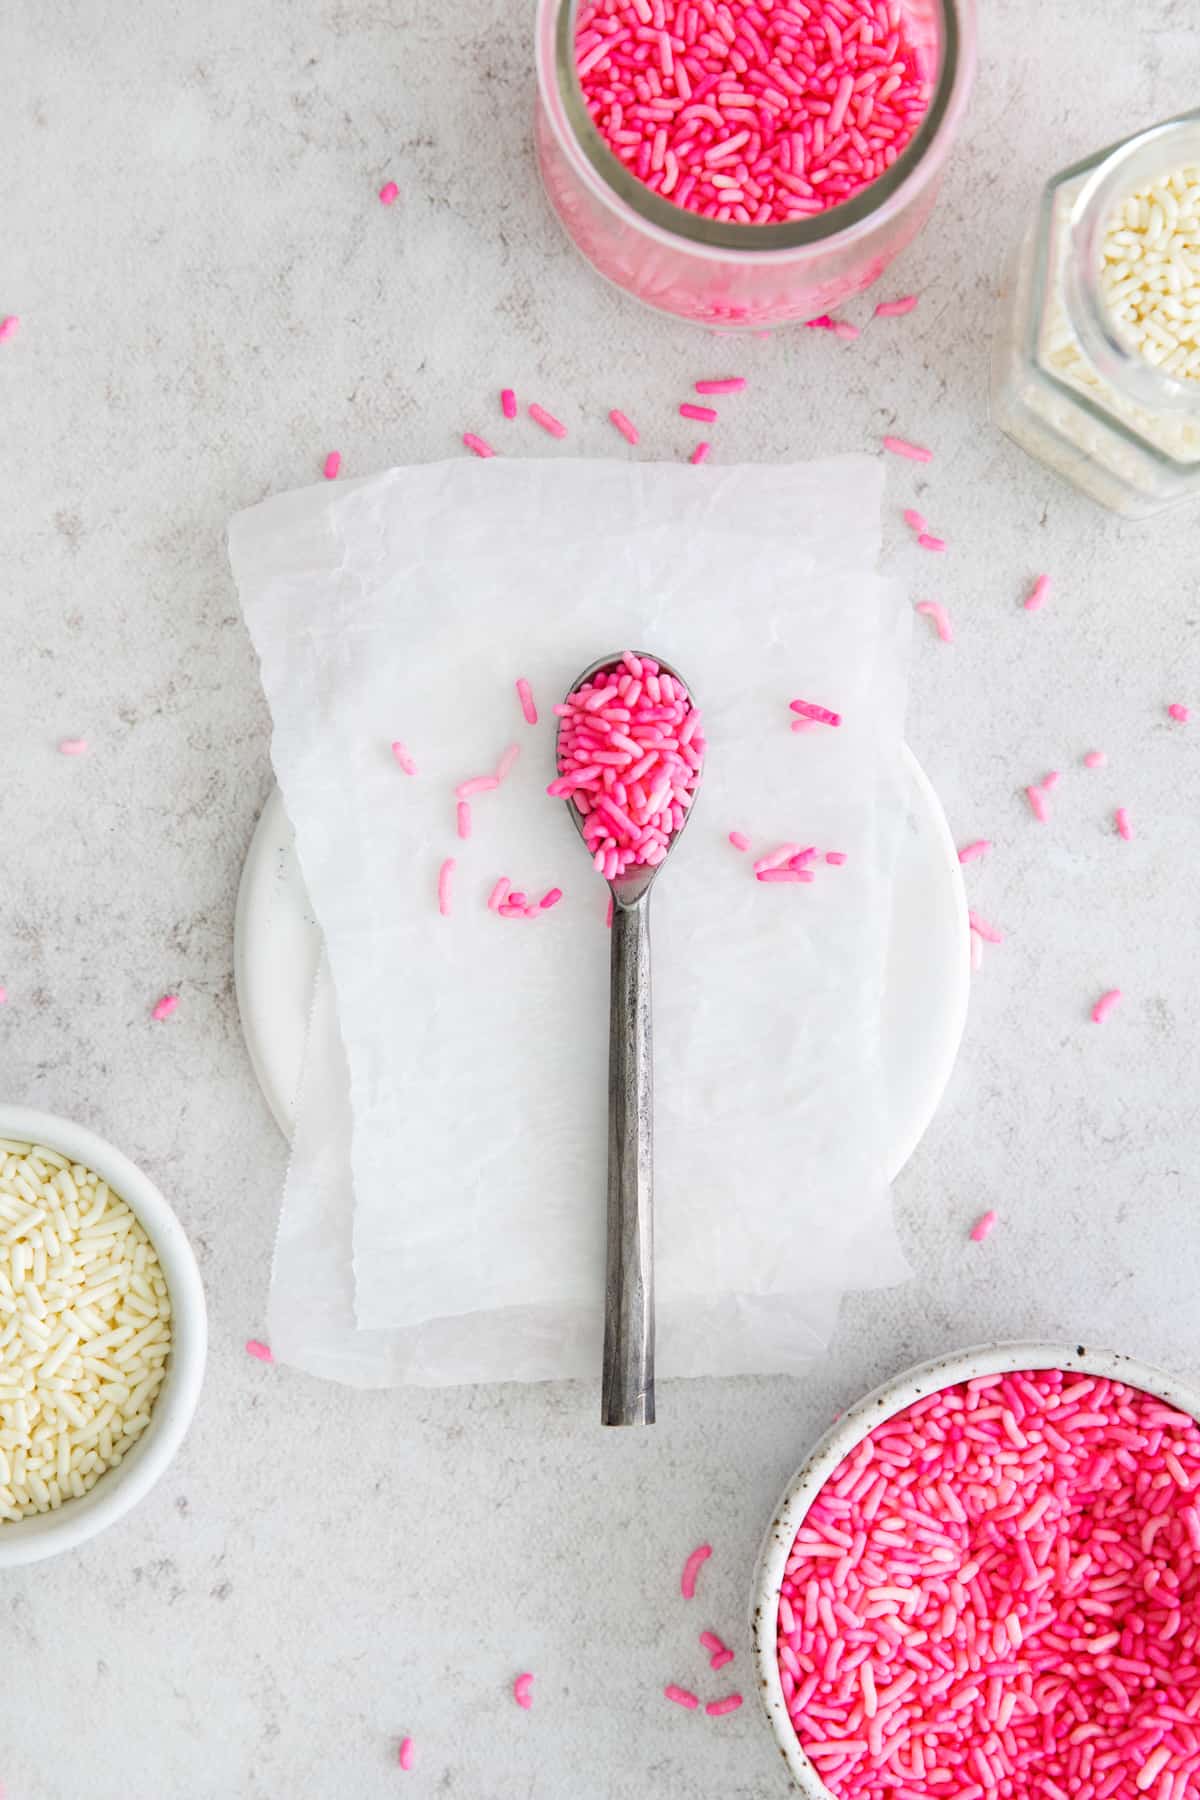 pink dyed sprinkles on a spoon